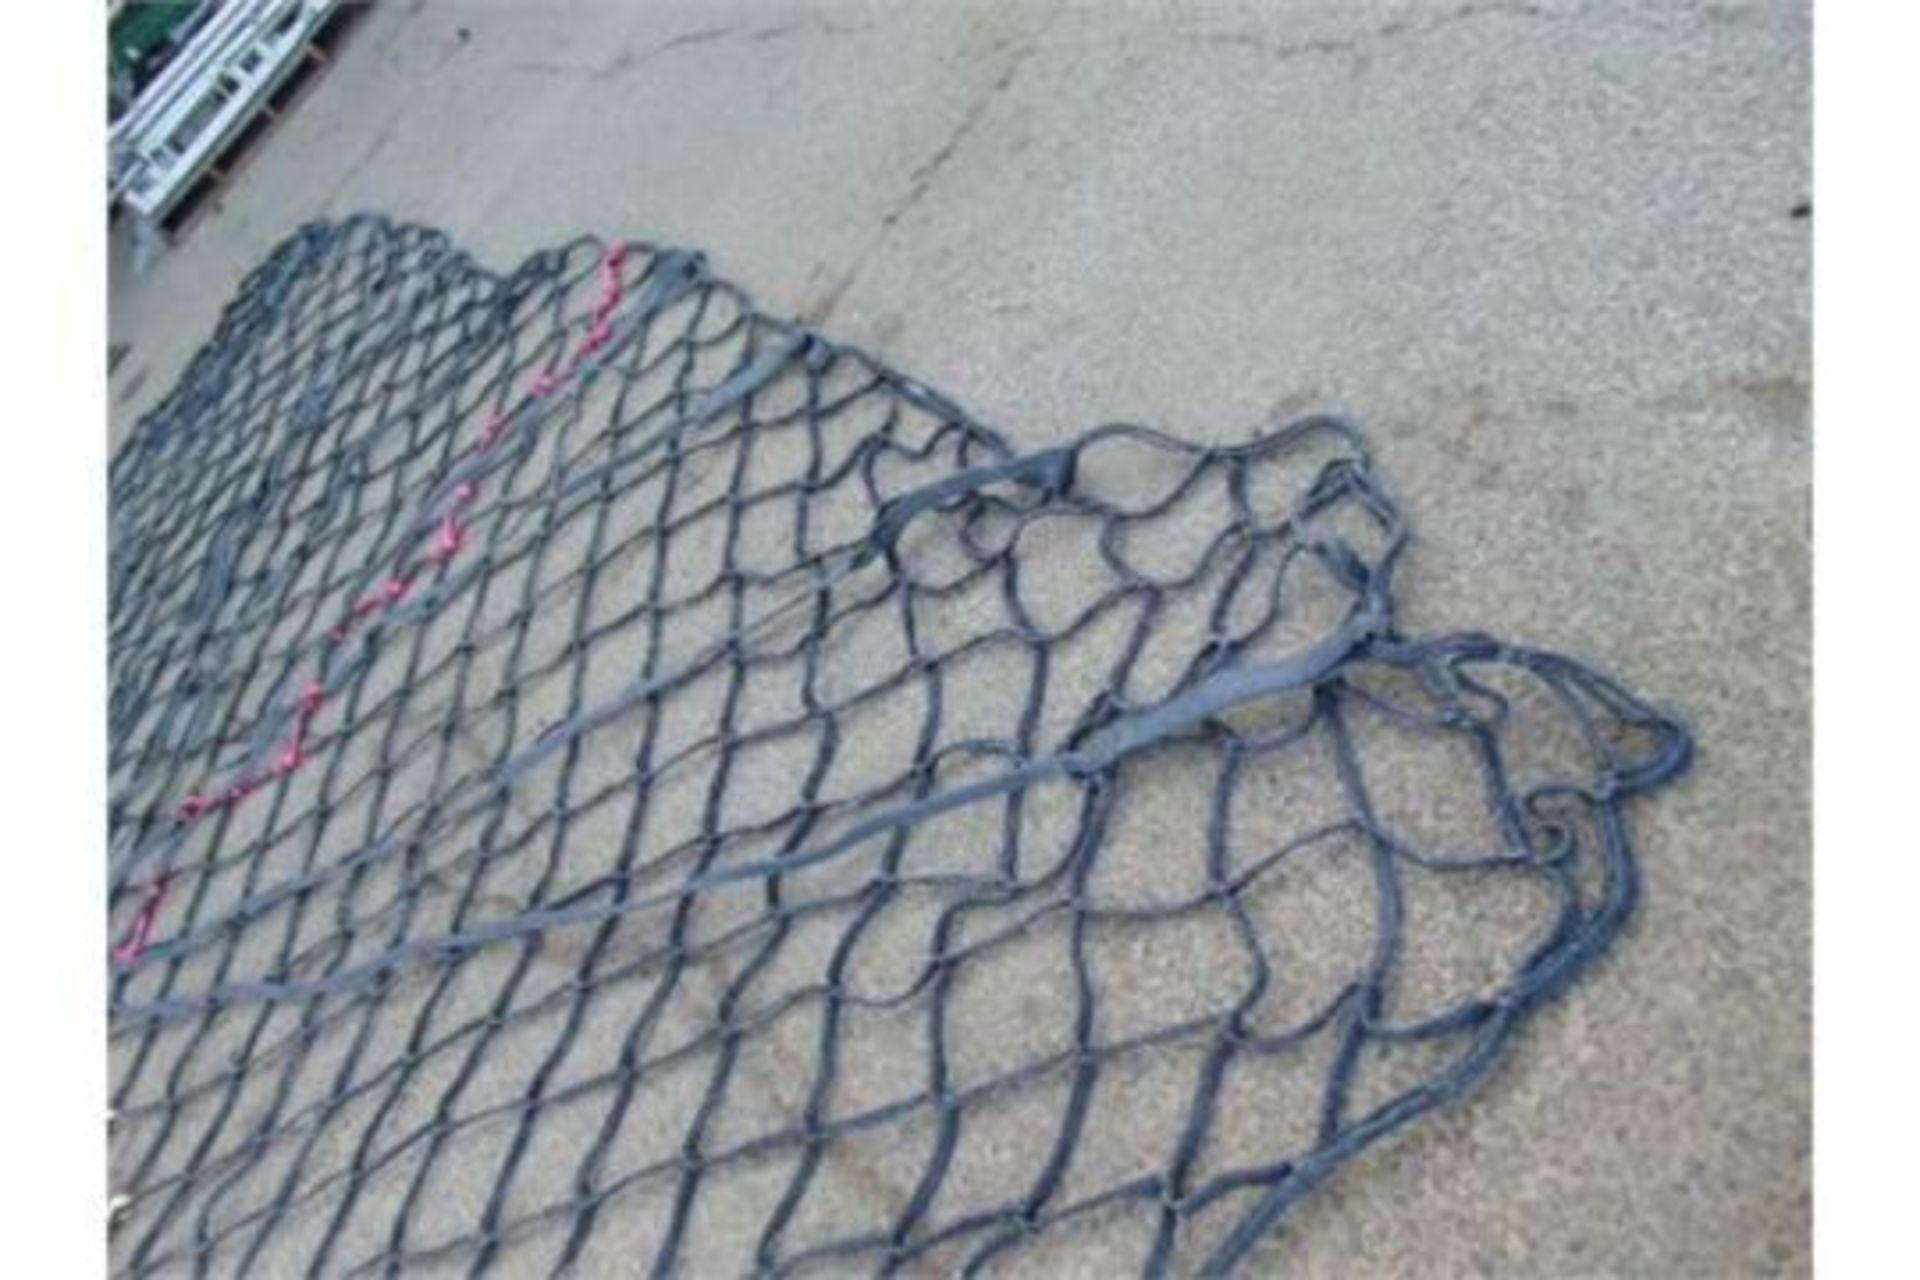 5600Kg Helicopter Cargo Net - Image 7 of 13